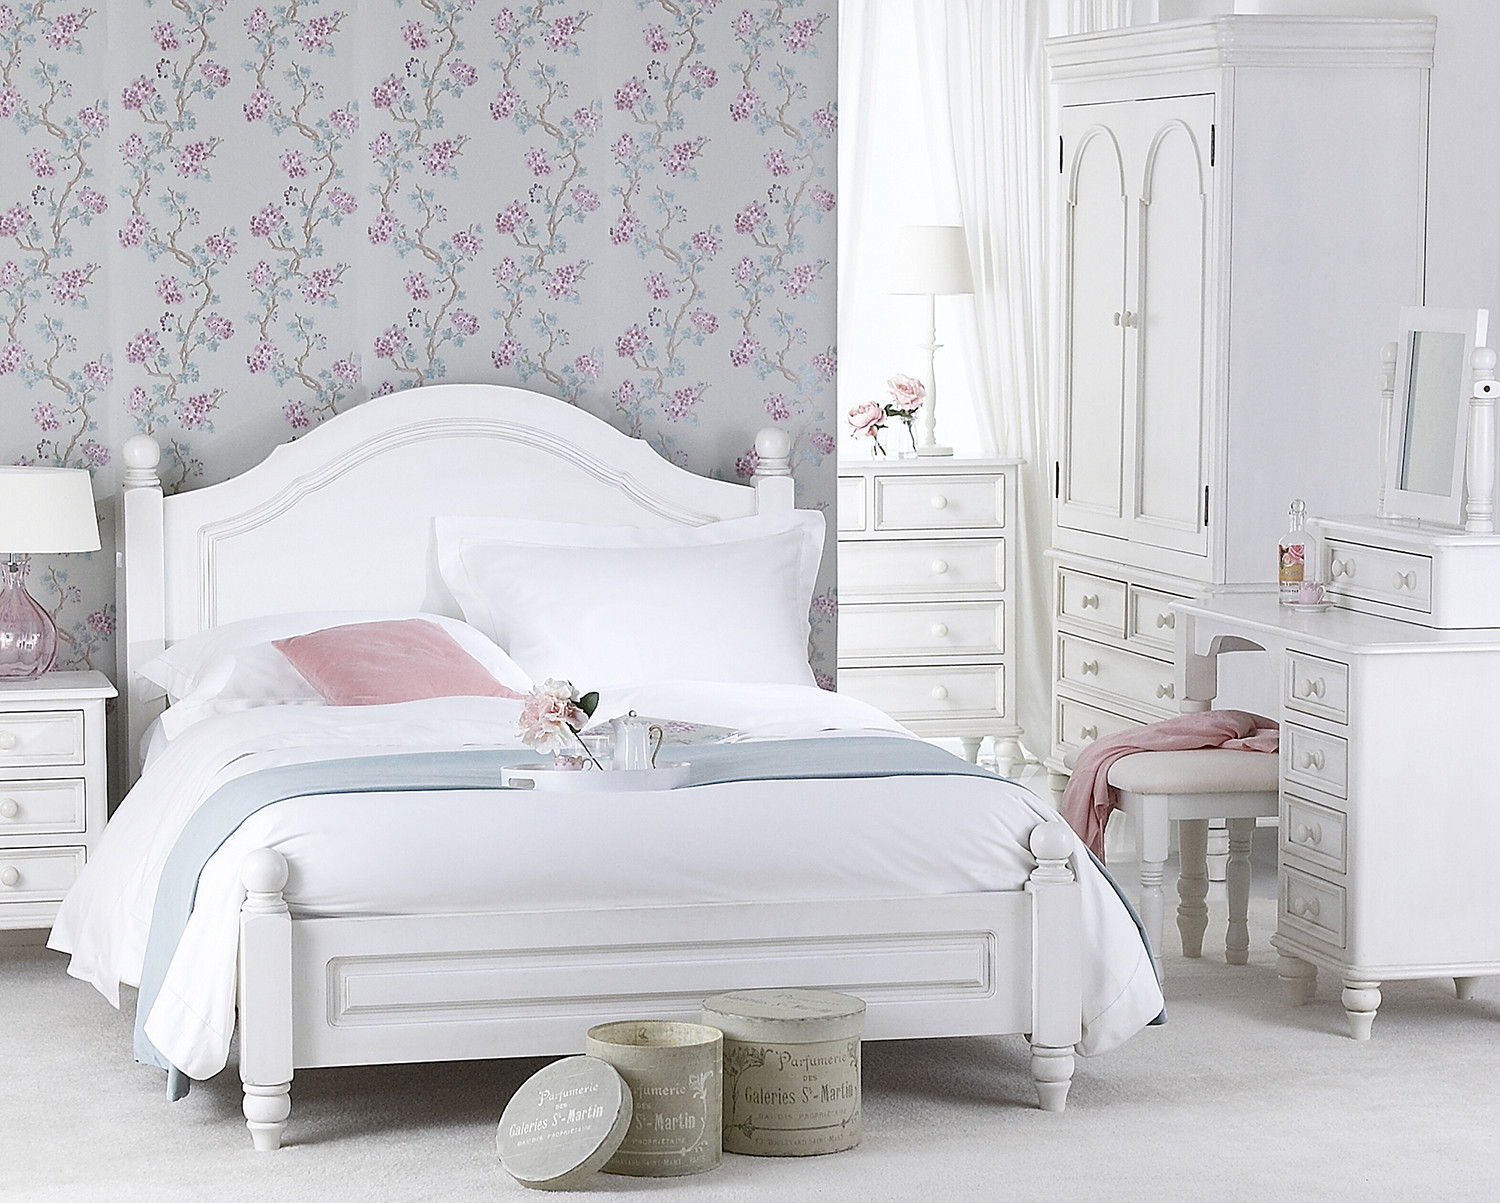 Shabby Chic Bedroom Furniture Sets
 PROVENCE Antique White Bedroom Furniture Shabby Chic